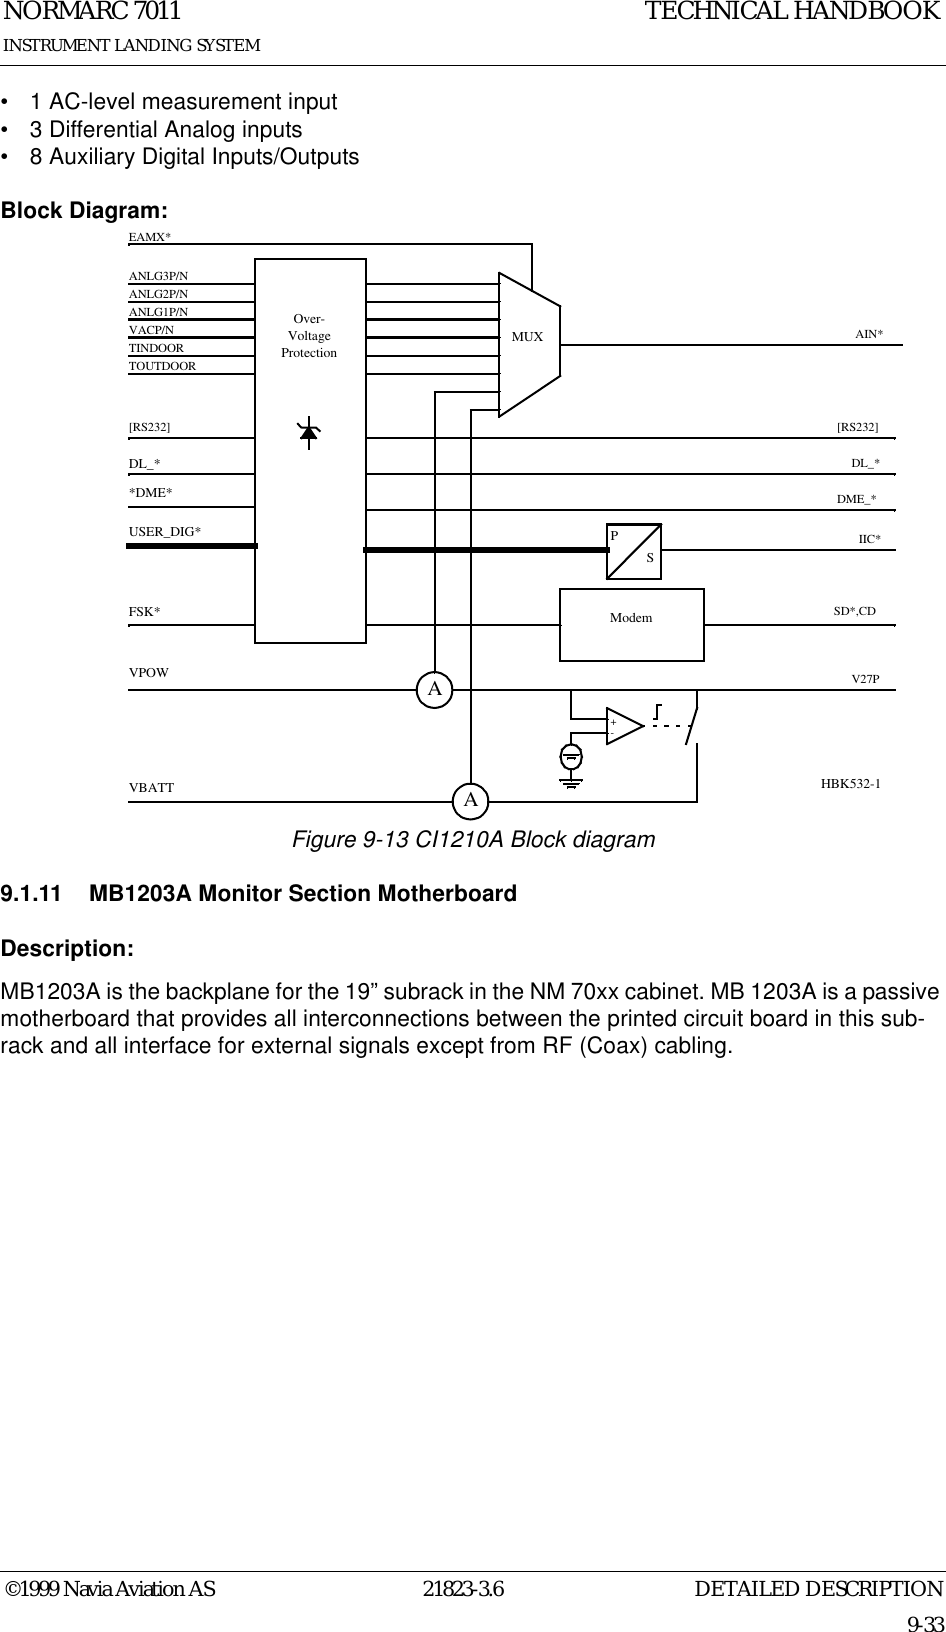 DETAILED DESCRIPTIONNORMARC 701121823-3.69-33INSTRUMENT LANDING SYSTEMTECHNICAL HANDBOOK©1999 Navia Aviation AS• 1 AC-level measurement input• 3 Differential Analog inputs• 8 Auxiliary Digital Inputs/OutputsBlock Diagram:Figure 9-13 CI1210A Block diagram9.1.11 MB1203A Monitor Section MotherboardDescription:MB1203A is the backplane for the 19” subrack in the NM 70xx cabinet. MB 1203A is a passive motherboard that provides all interconnections between the printed circuit board in this sub-rack and all interface for external signals except from RF (Coax) cabling.+-AAPSModemMUXTOUTDOORTINDOORVACP/NANLG3P/NANLG2P/NANLG1P/NEAMX*AIN*USER_DIG*FSK*SD*,CDVPOWVBATTV27PIIC*[RS232]DL_*[RS232]DL_*Over-VoltageProtection*DME*DME_*HBK532-1